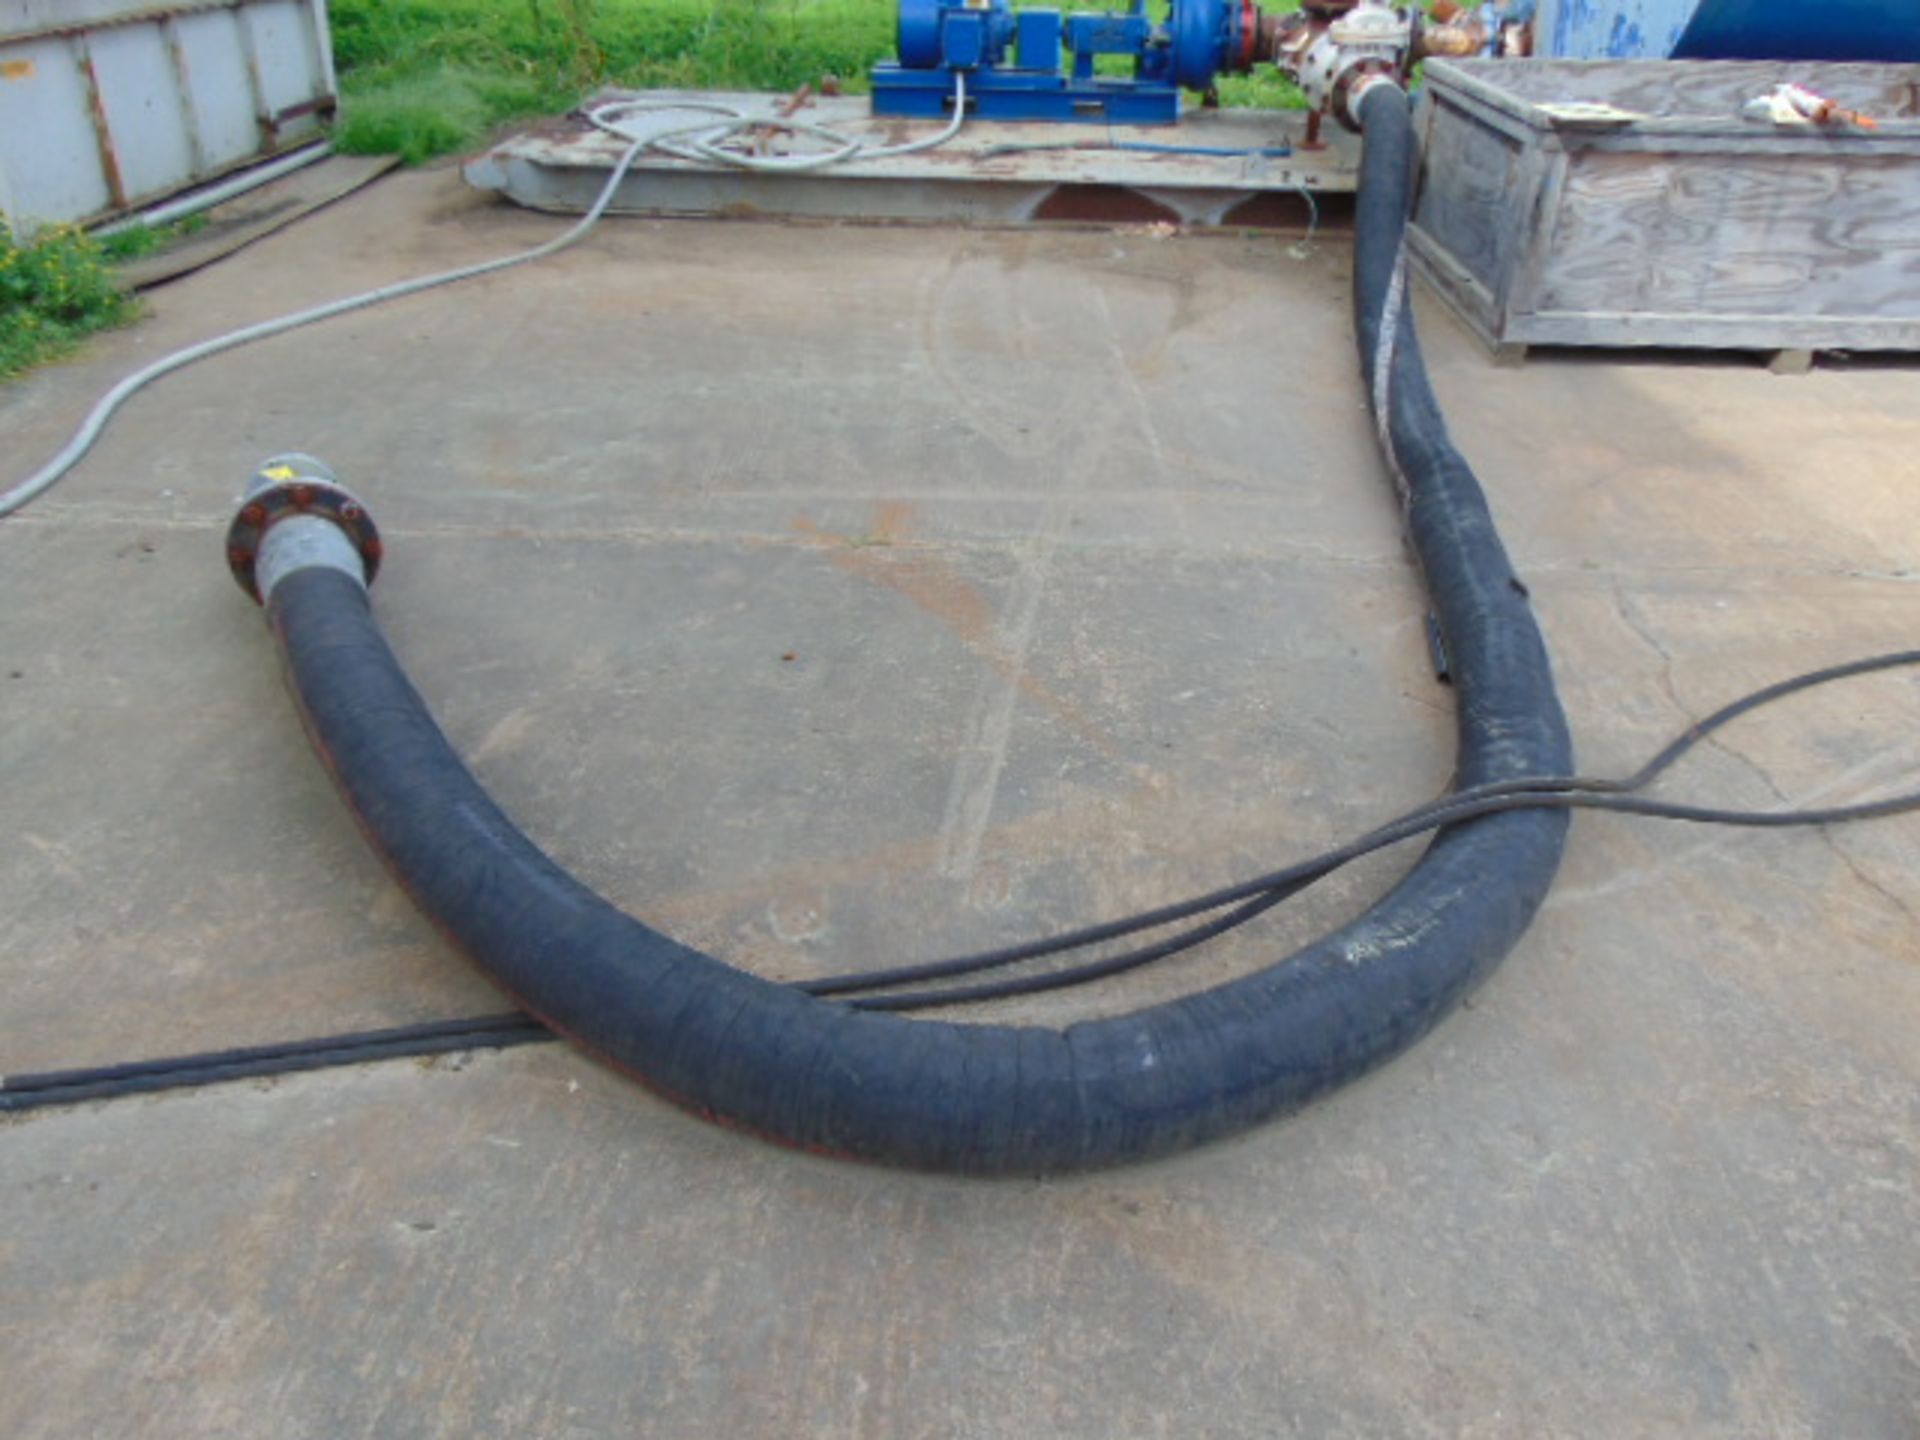 LOT CONSISTING OF: hoses & fittings